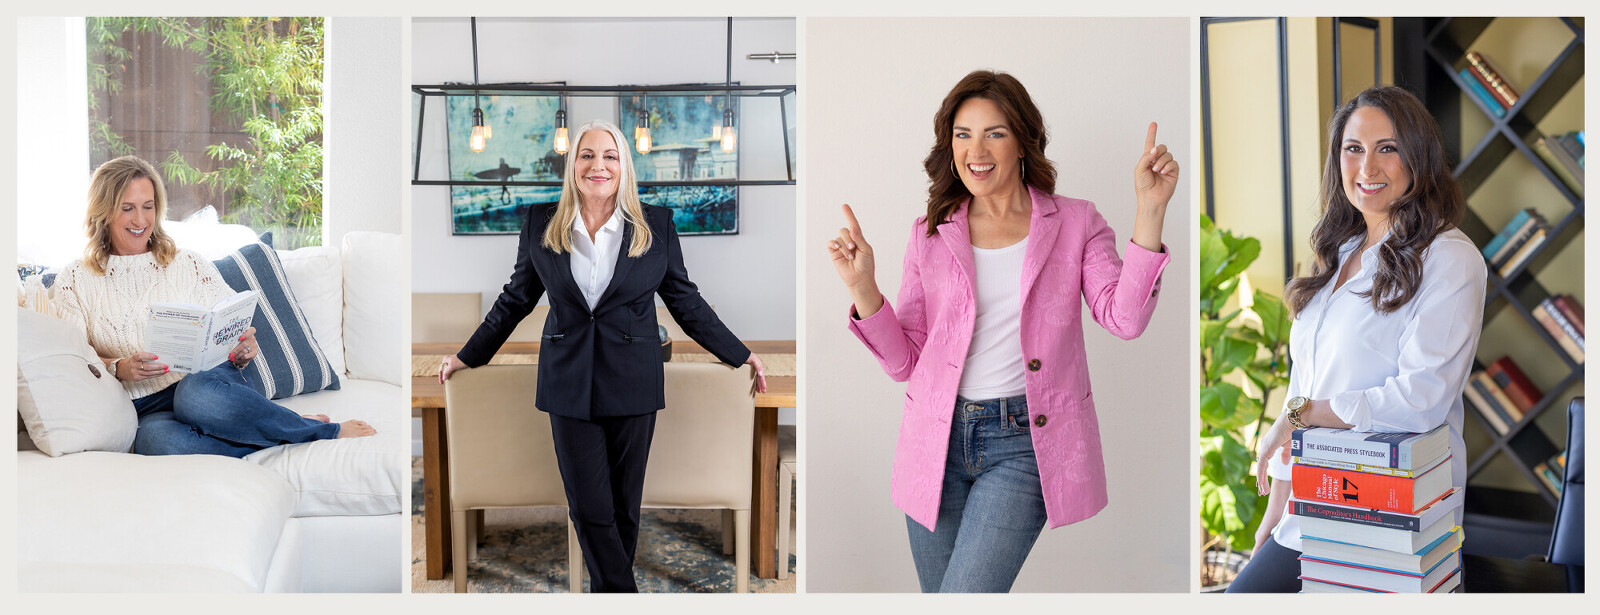 Sample Brand Photo Gallery of 4 San Diego Business Owners